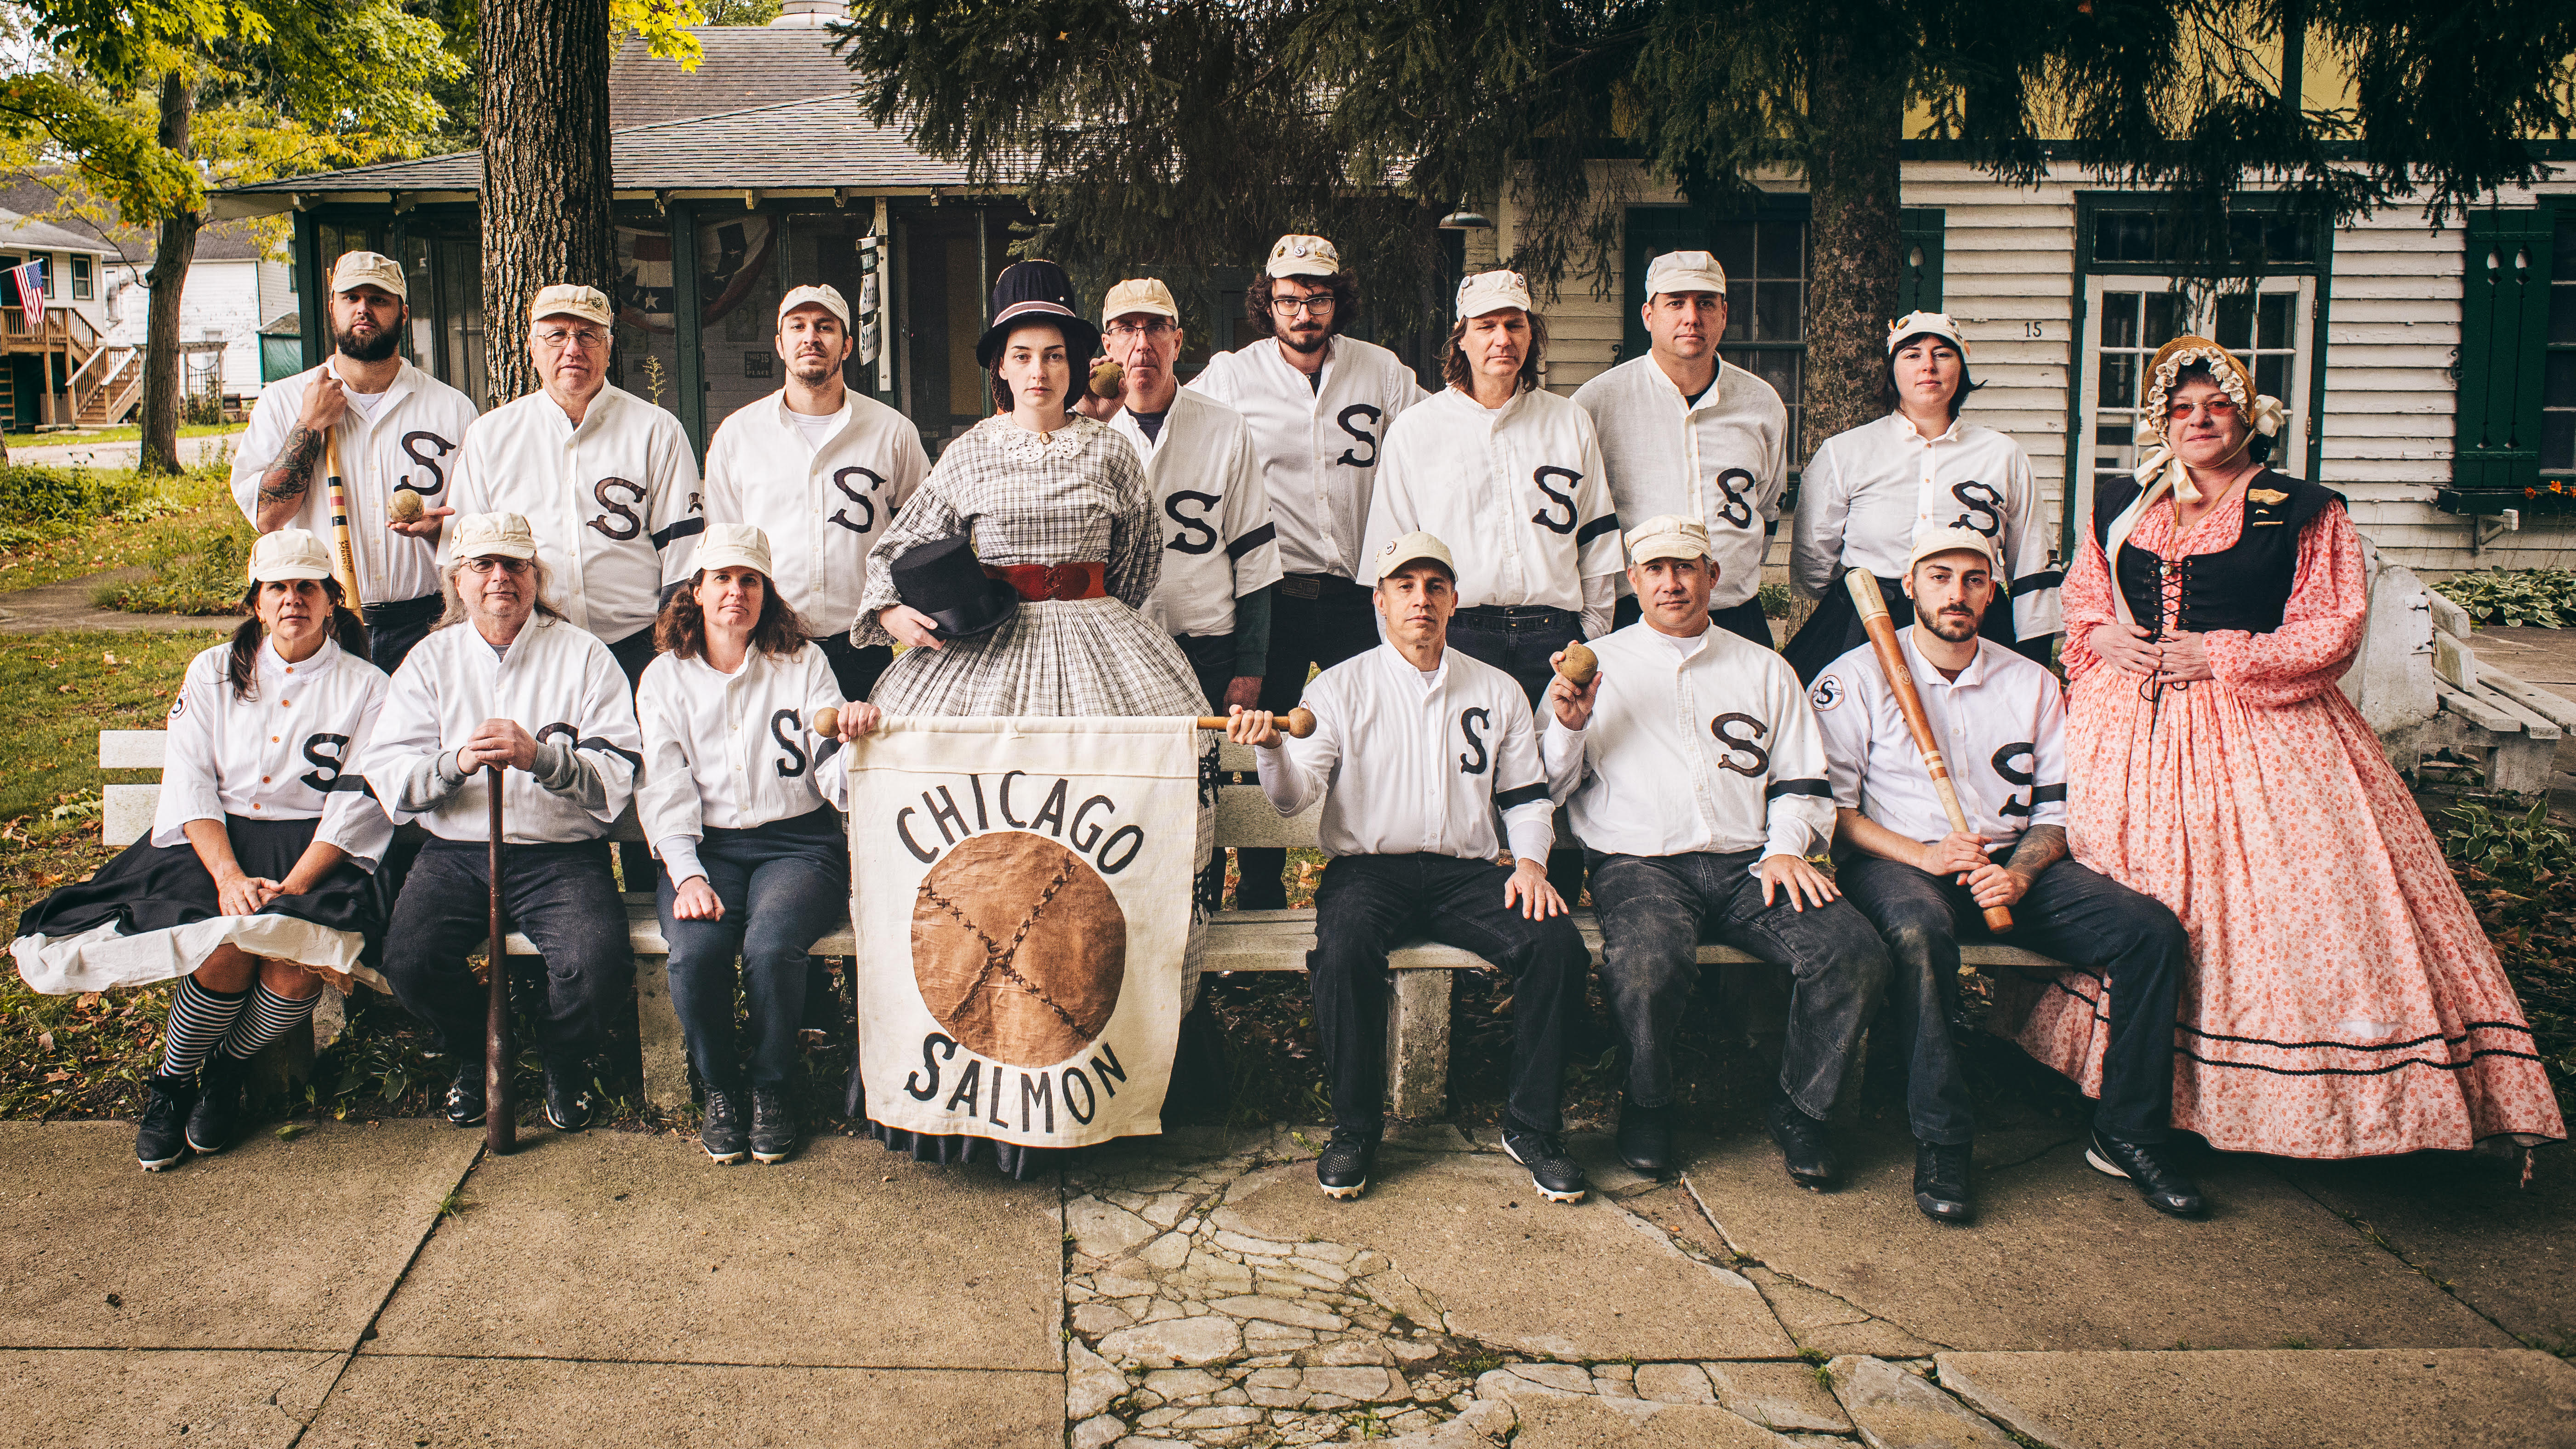 Don't Miss This Amazing Vintage Baseball Game in Oak Park, IL